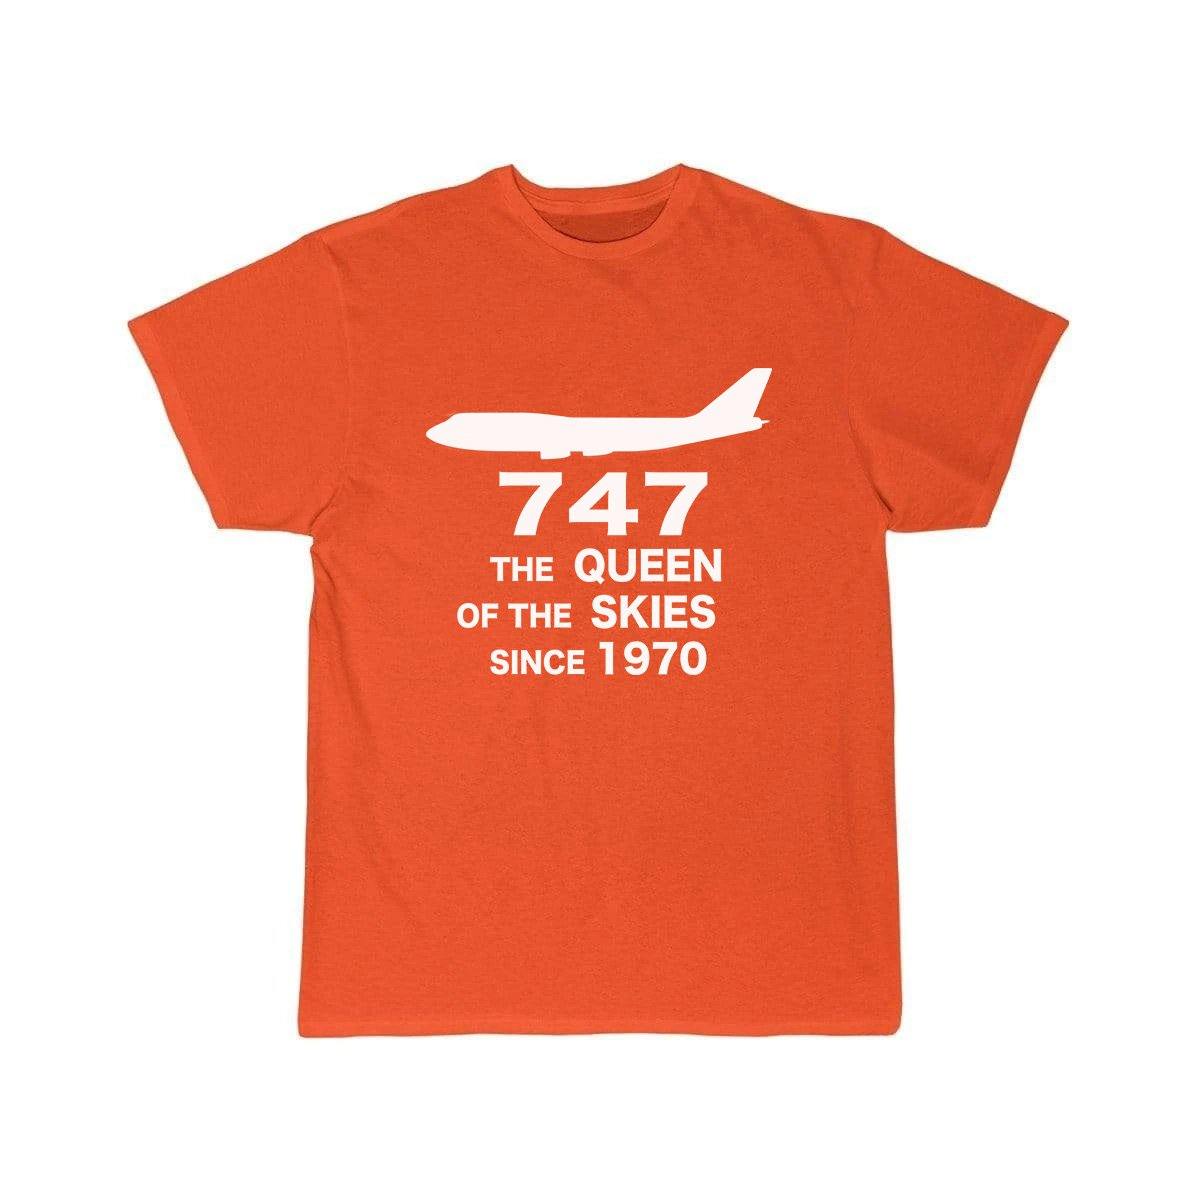 B747 THE QUEEN OF THE SKIES SINCE 1970 DESIGNED T-SHIRT THE AV8R